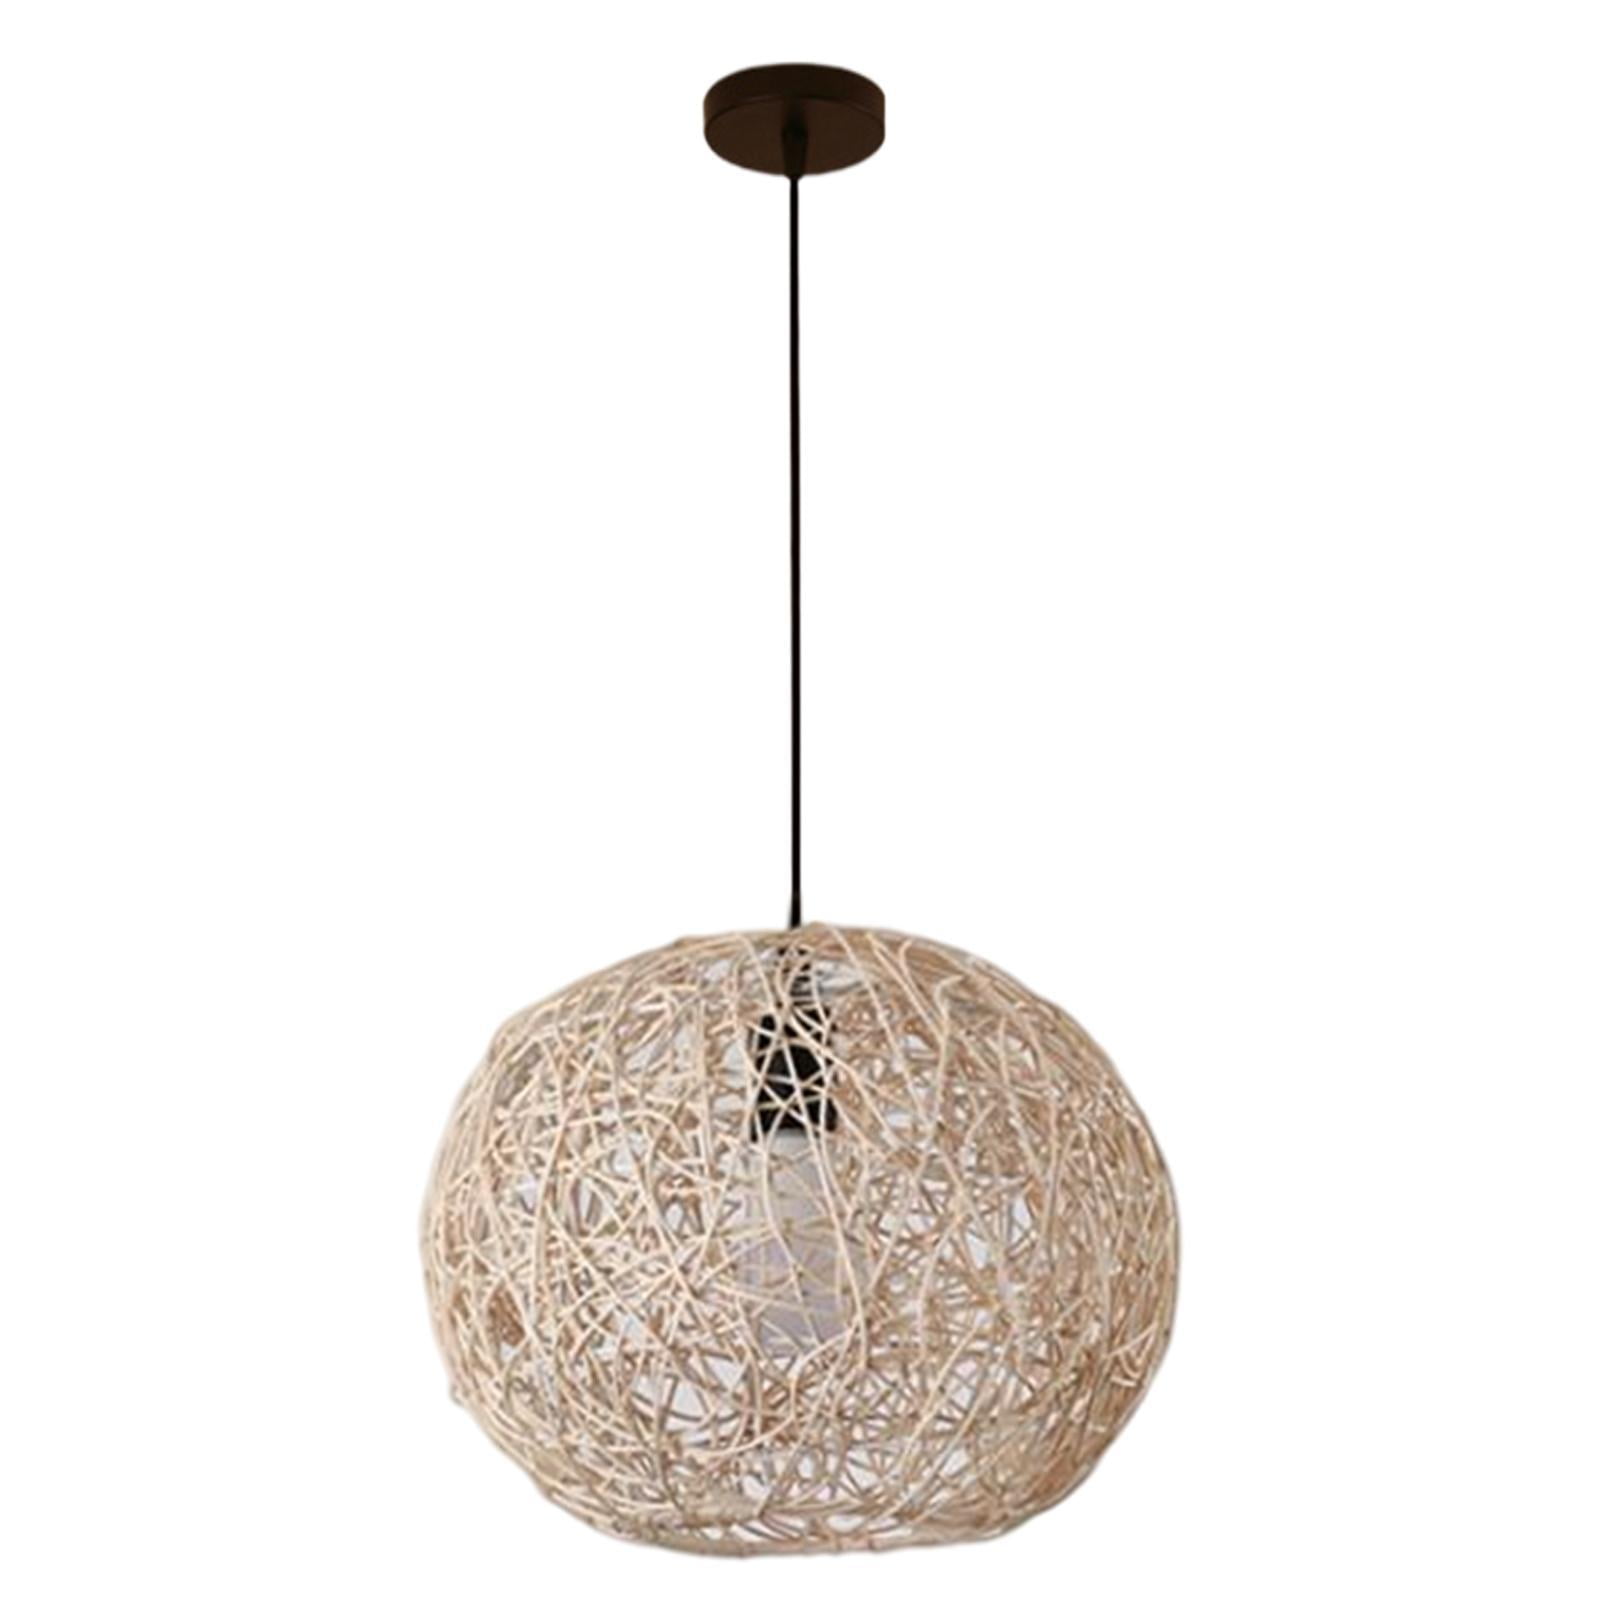 Gold LED Rattan Ball Chandeliers Waterproof Battery Operated Creative Decorative Ceiling Lights for Home Hotel Cafe Restaurant Pub Decor 